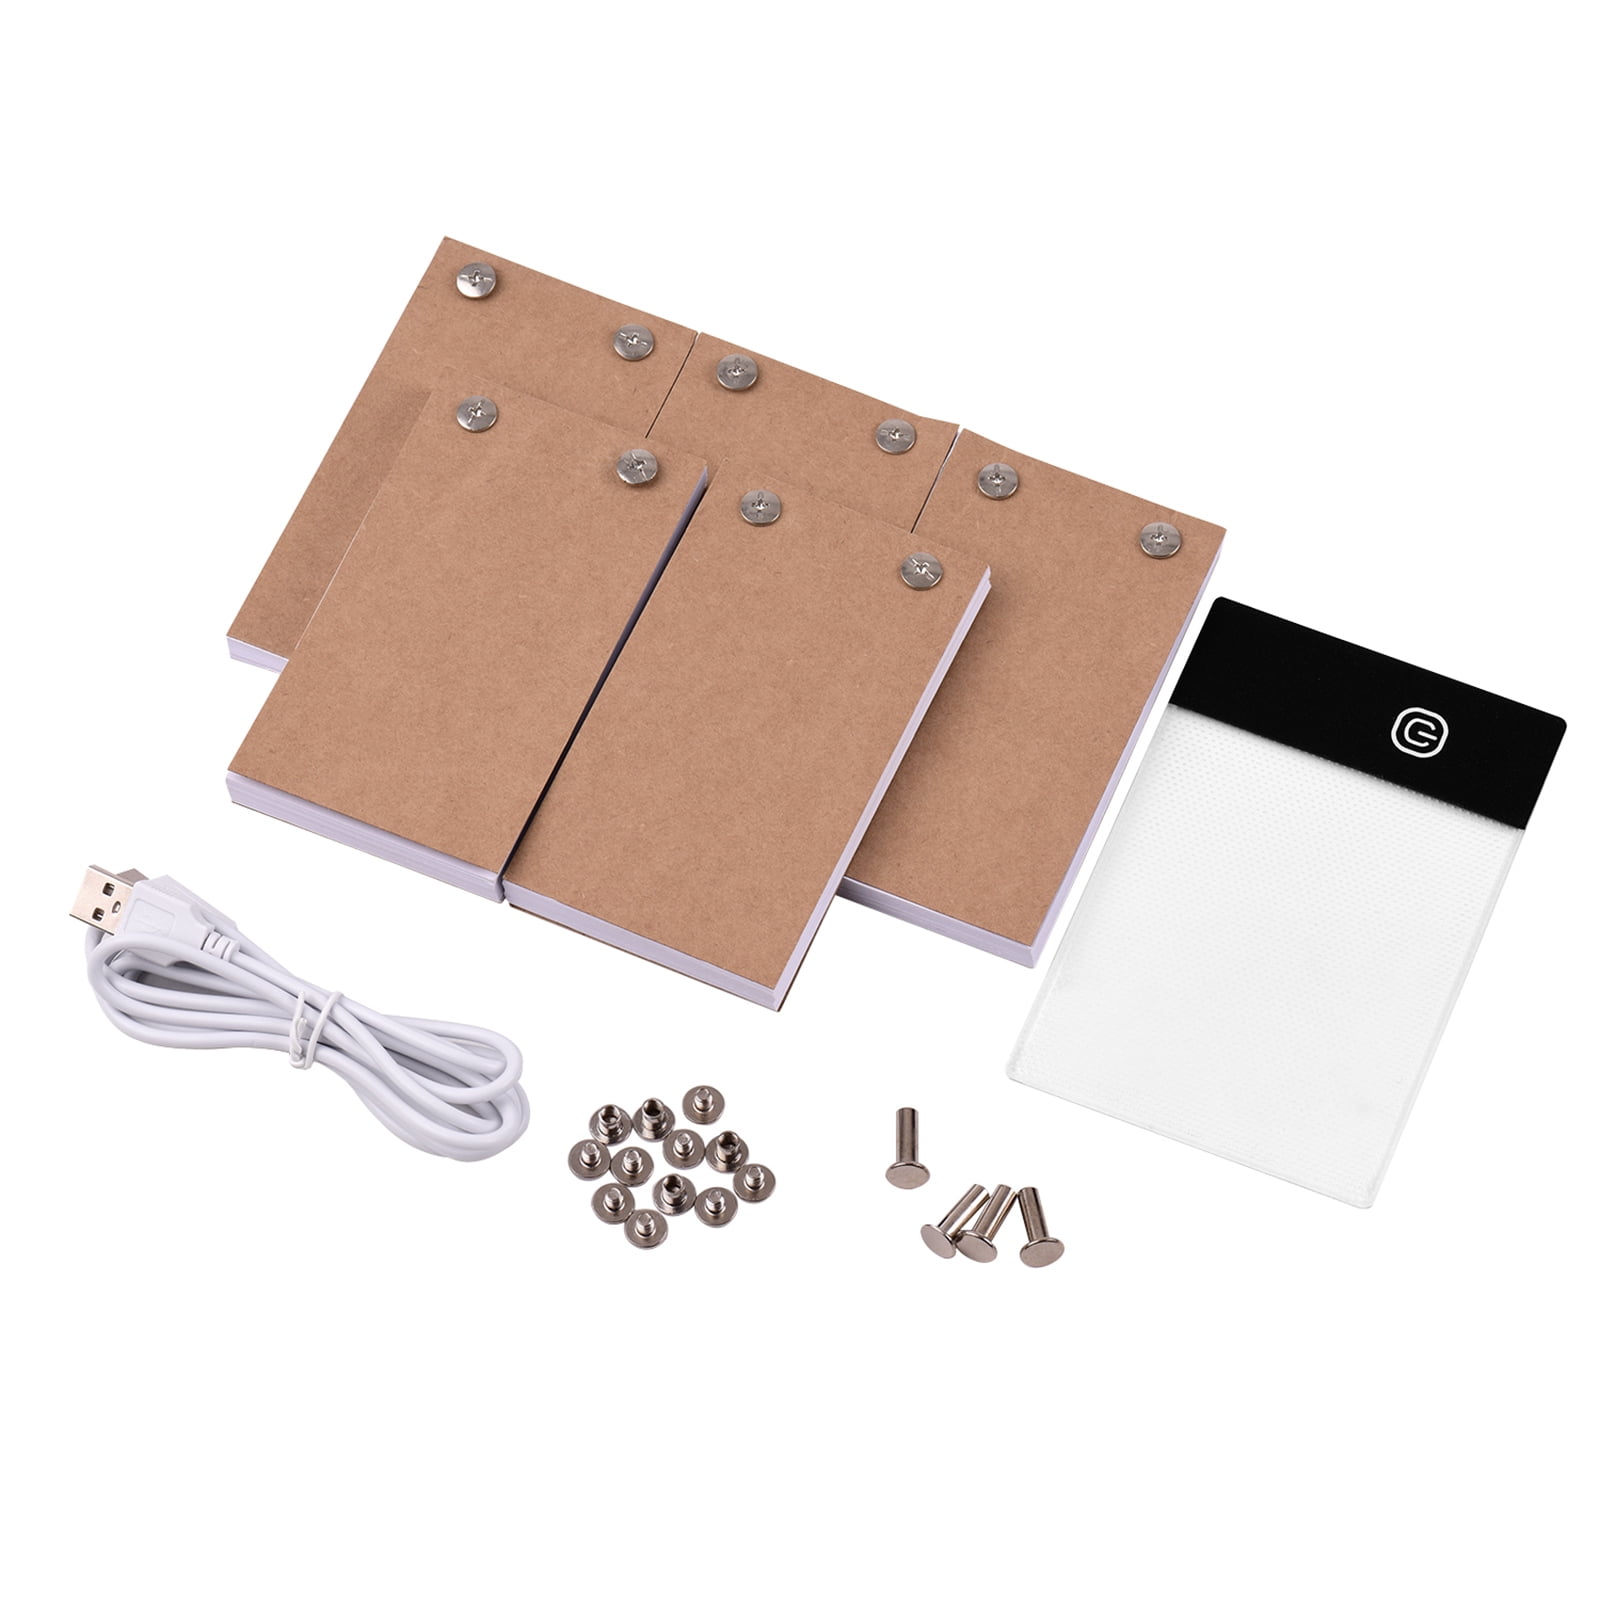  Flip Book Kit with LED Light Pad. Includes 240 Sheets Flip Book  Paper with Screws for Drawing and Tracing. Animation Paper/Blank Flip Books  for A5 Flipbook Kit for Kids 9-12 6-8.